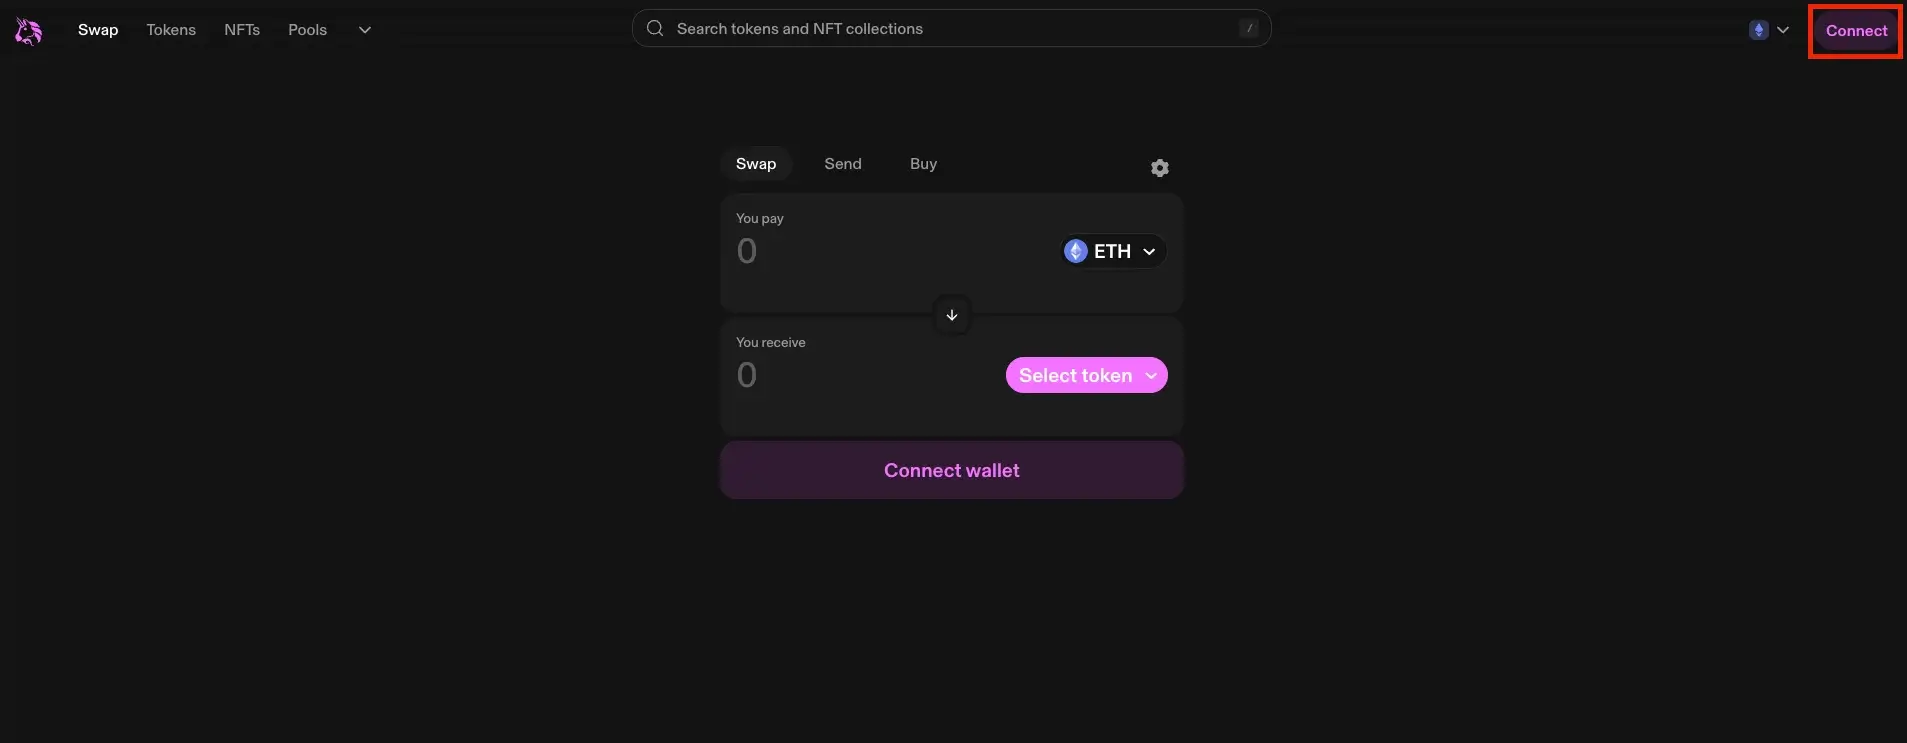 Step 1. Access Your Web3 Wallet/DApp Website and Click the "Connect" Button